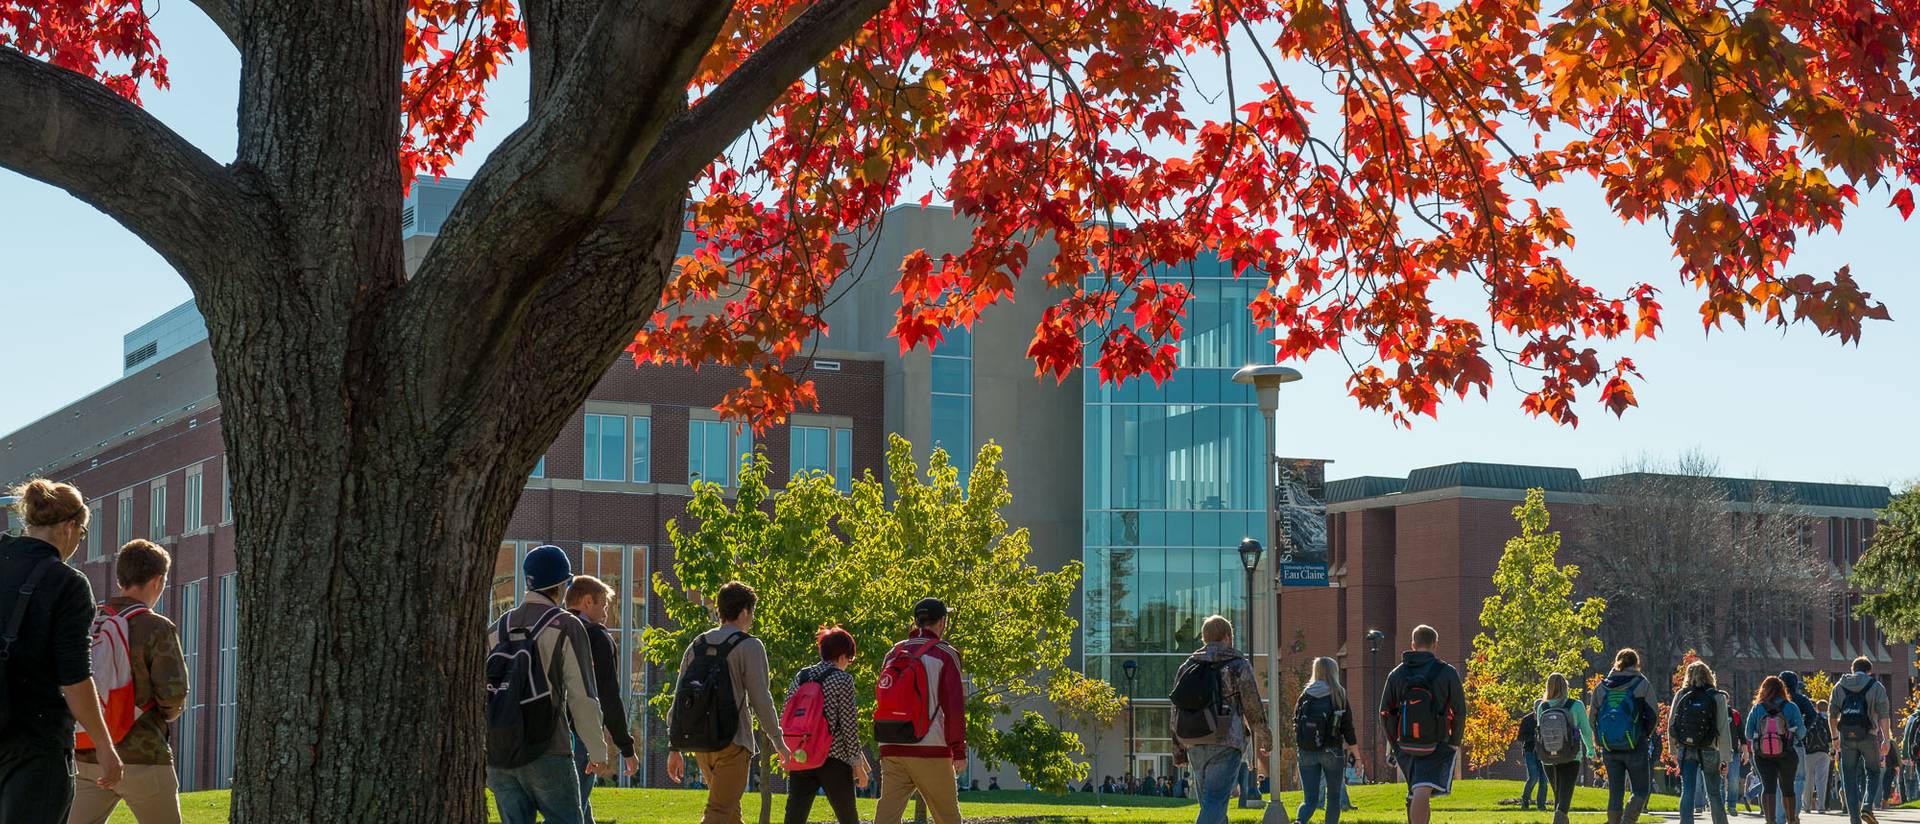 Students walk to class during the fall with a tree in the foreground.